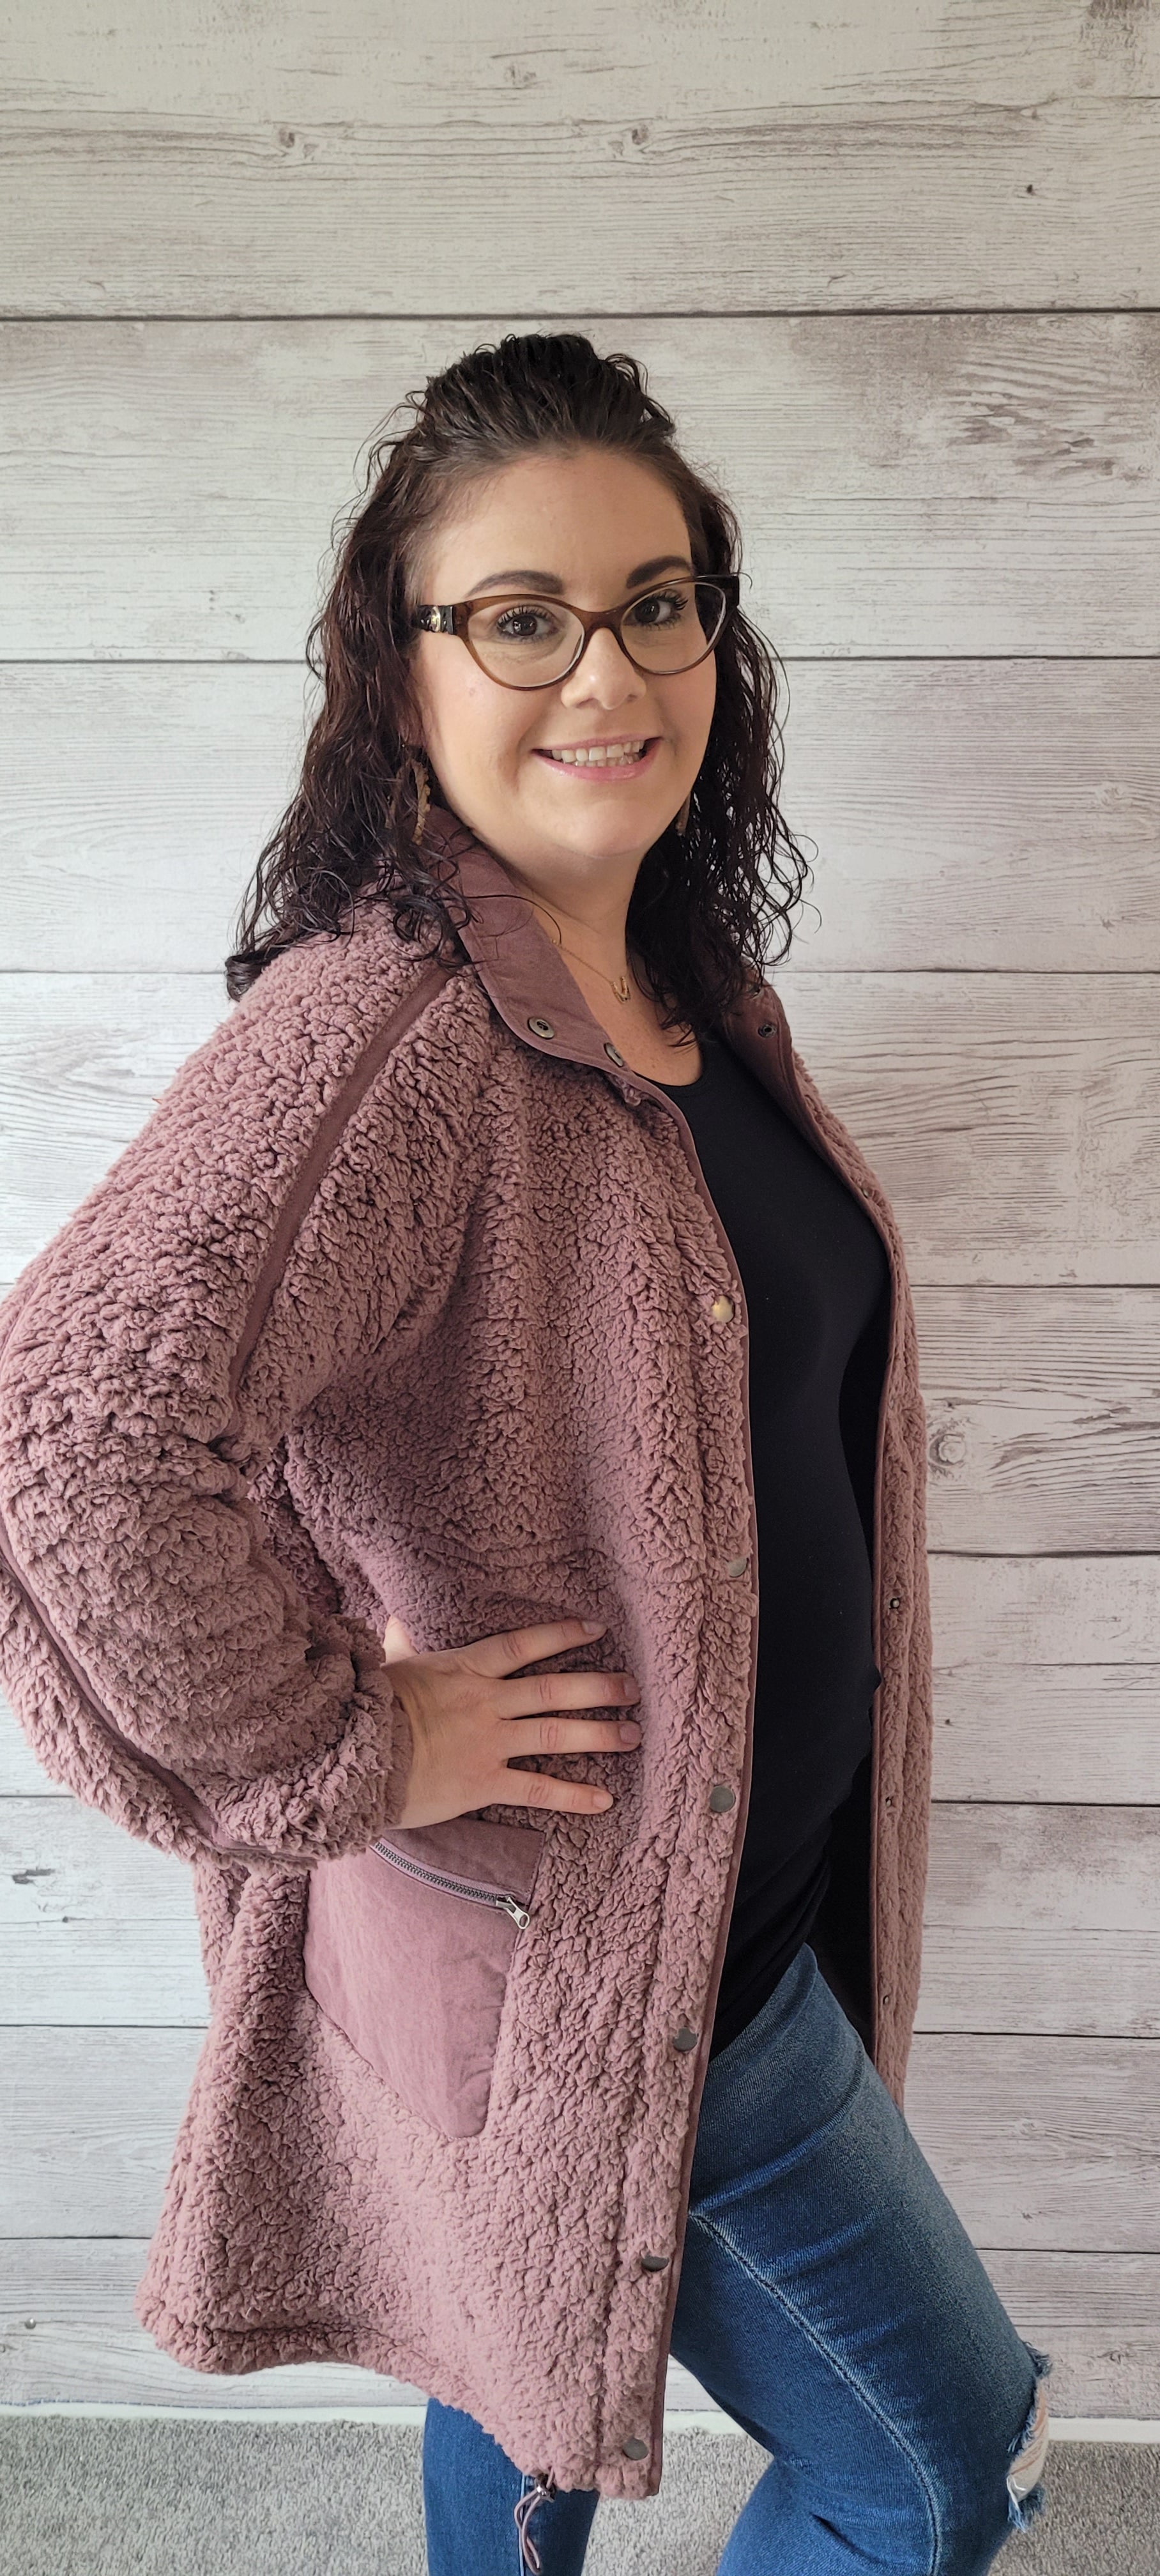 Keep snug and stay stylish with the "Maggie Mauve Fleece Jacket"! With metal snap button front closure, zippered pockets, contrast trim, and drawstring hem, you'll look totally 'snow'-tastic! Cozy up and stay oh-so chic! Sizes small through large.